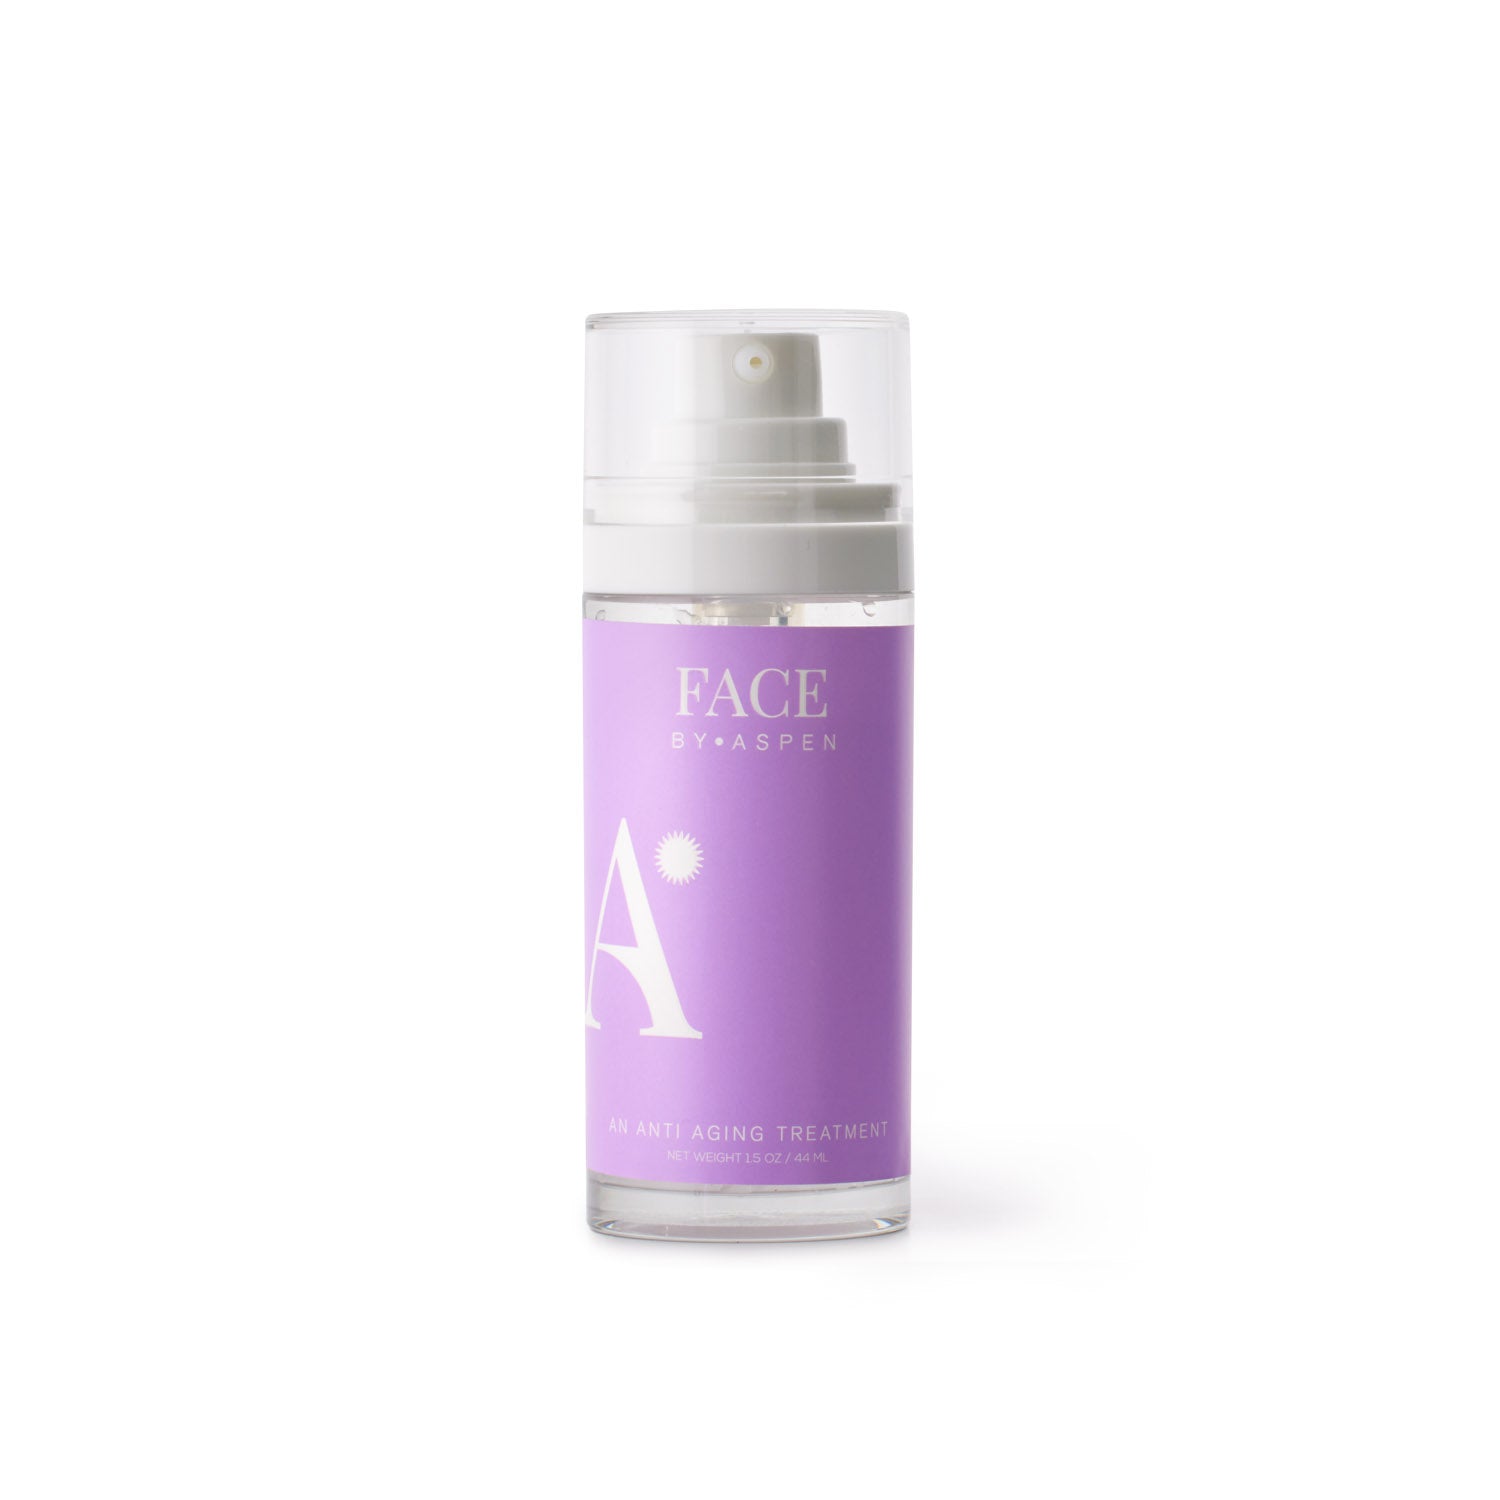 Face by Aspen: An Anti-Aging Treatment